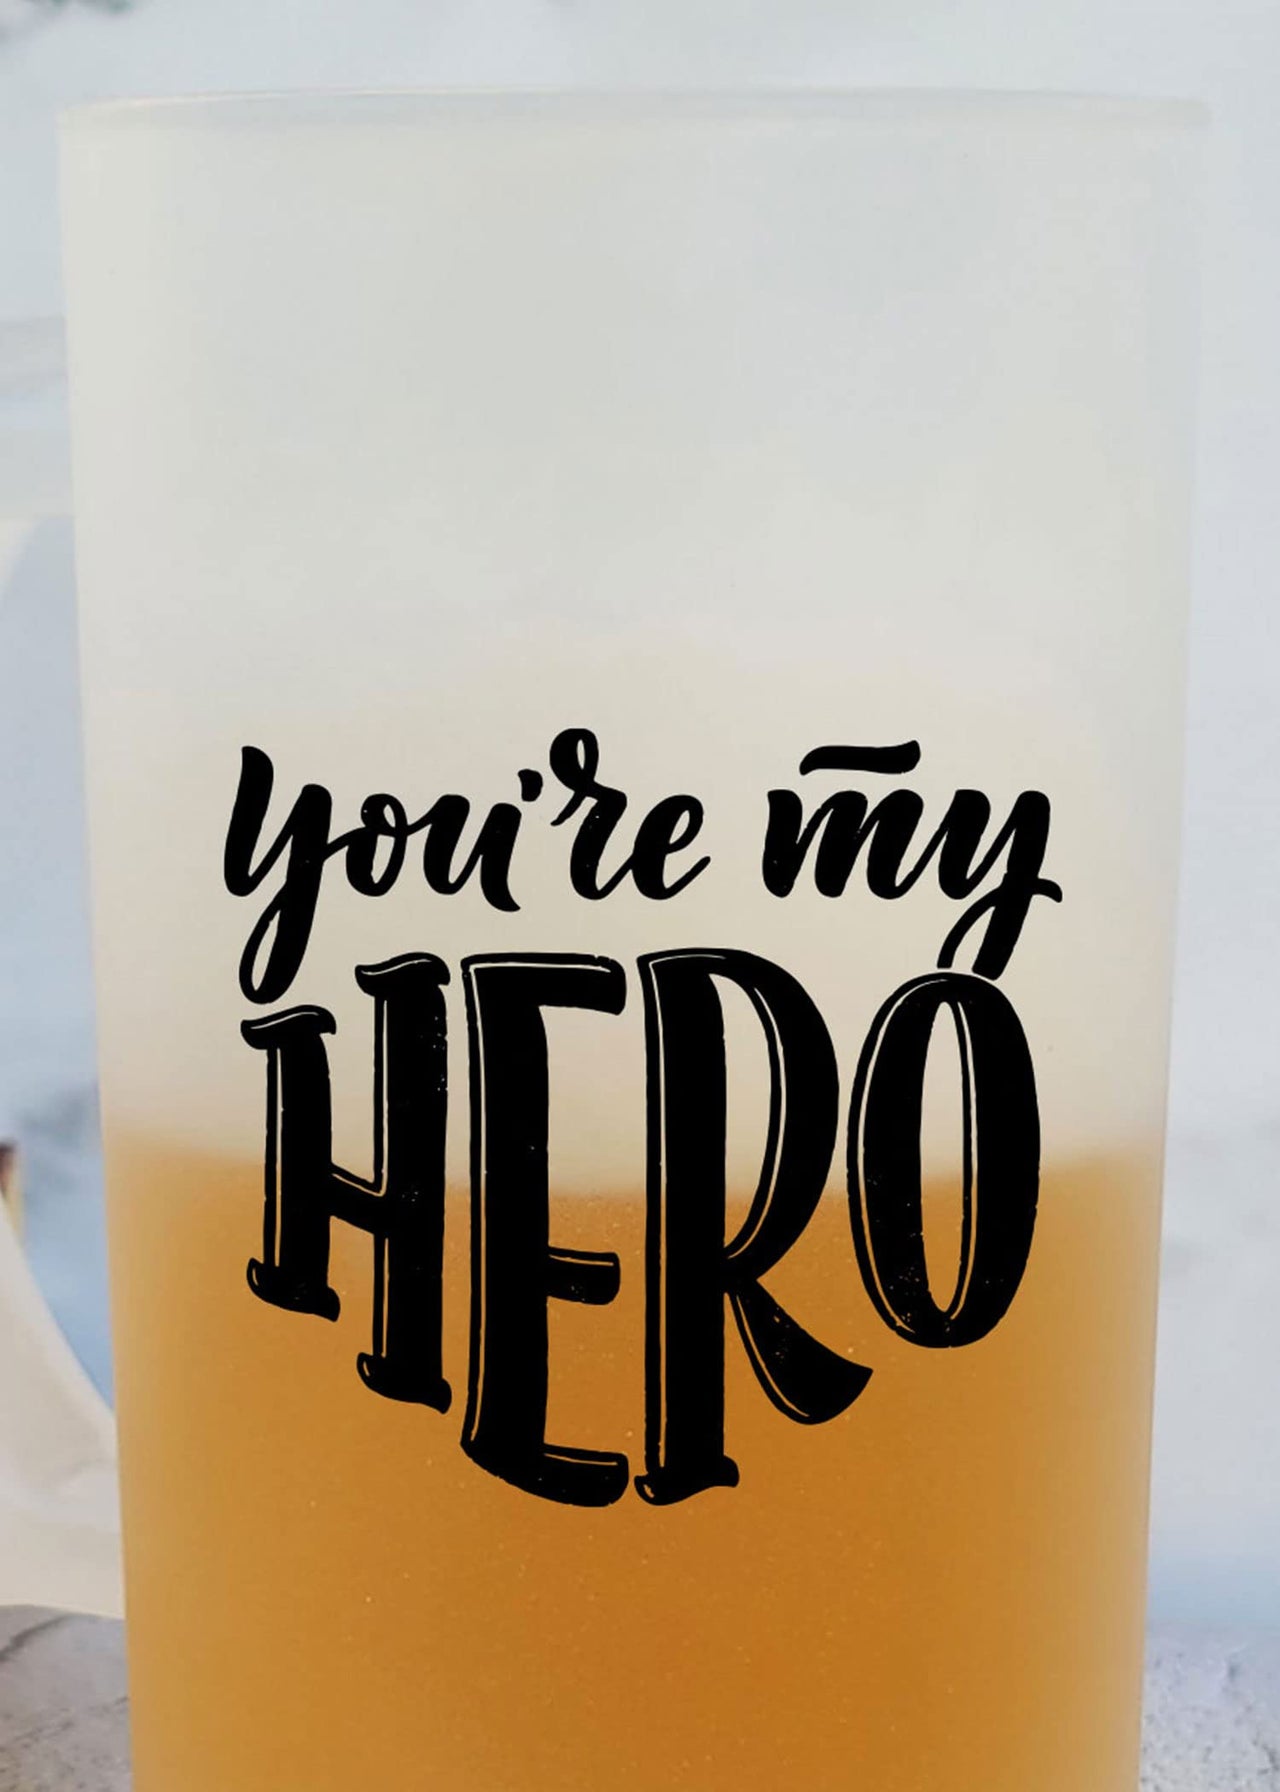 You're My Hero - Frosted Beer Mug